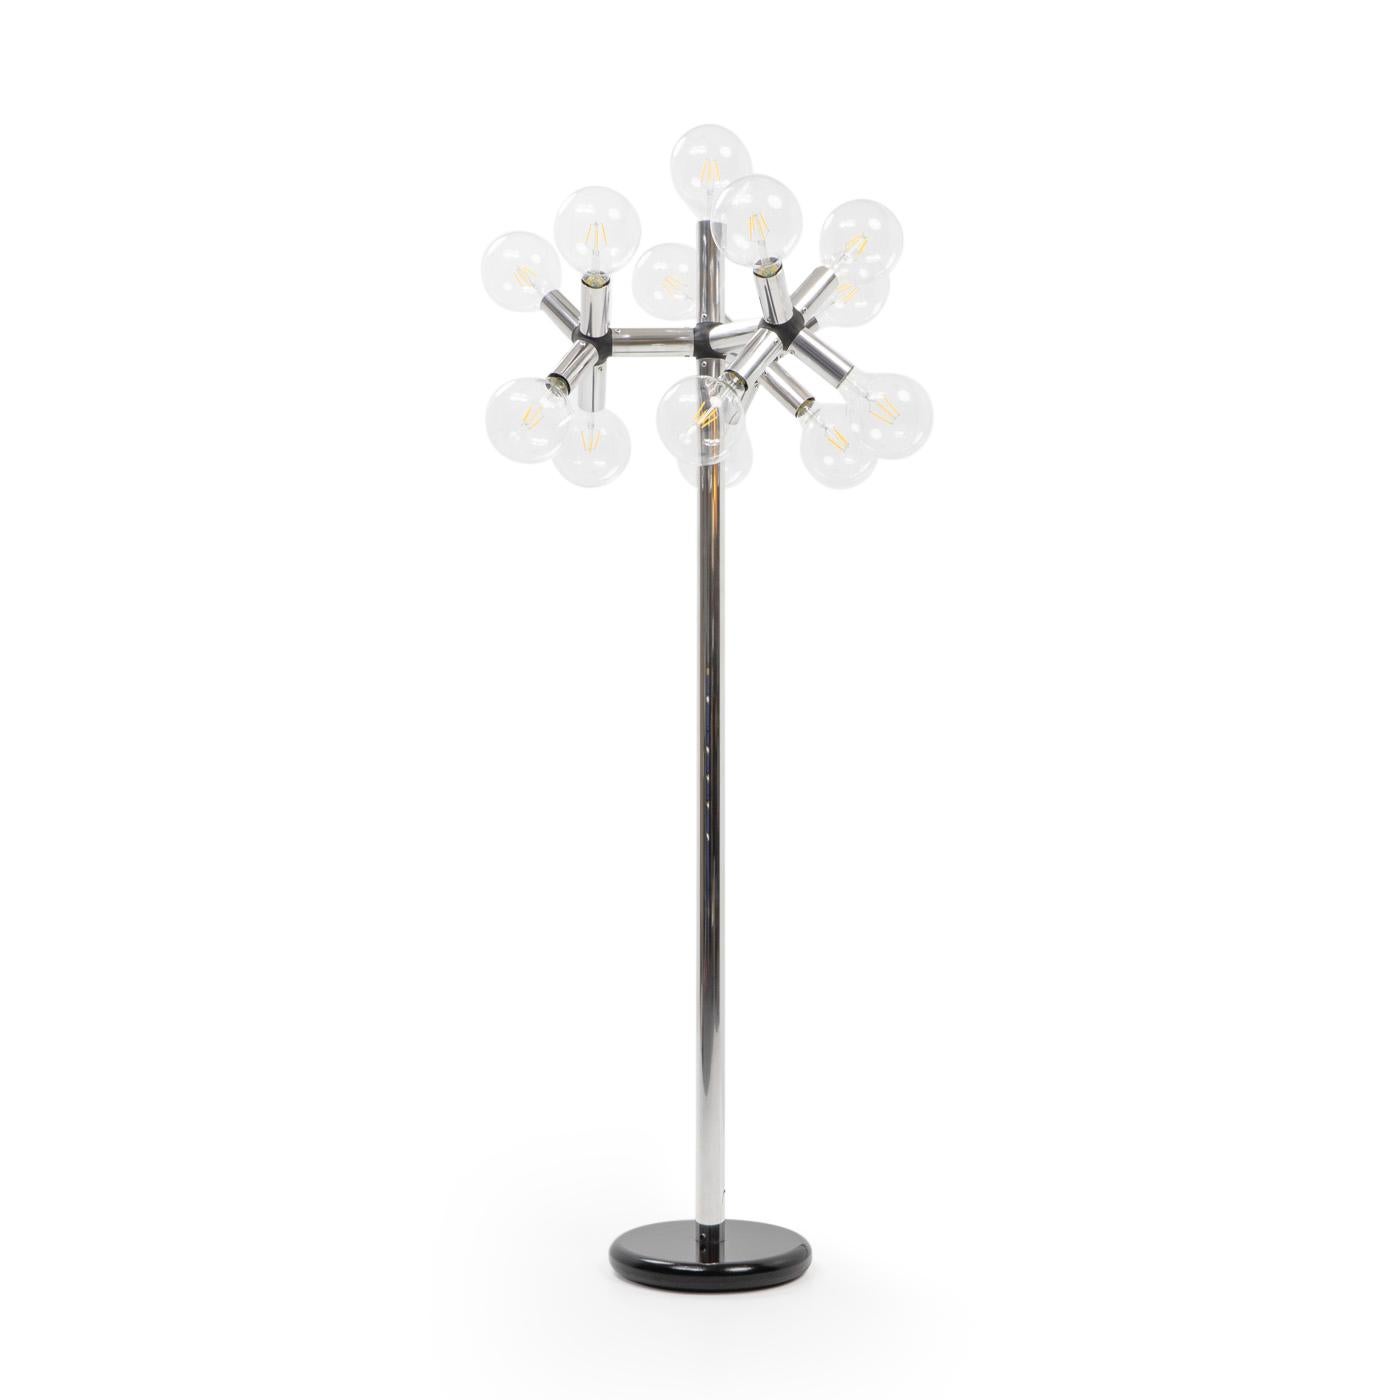 Aluminum “Atomic” Floorlamp designed by Trix and Robert Haussmann in the 1960s, and produced by Swisslamps International.

The lamp is made of aluminum and connecting plastic tubes, and features 13 individual 125mm globe lightbulbs